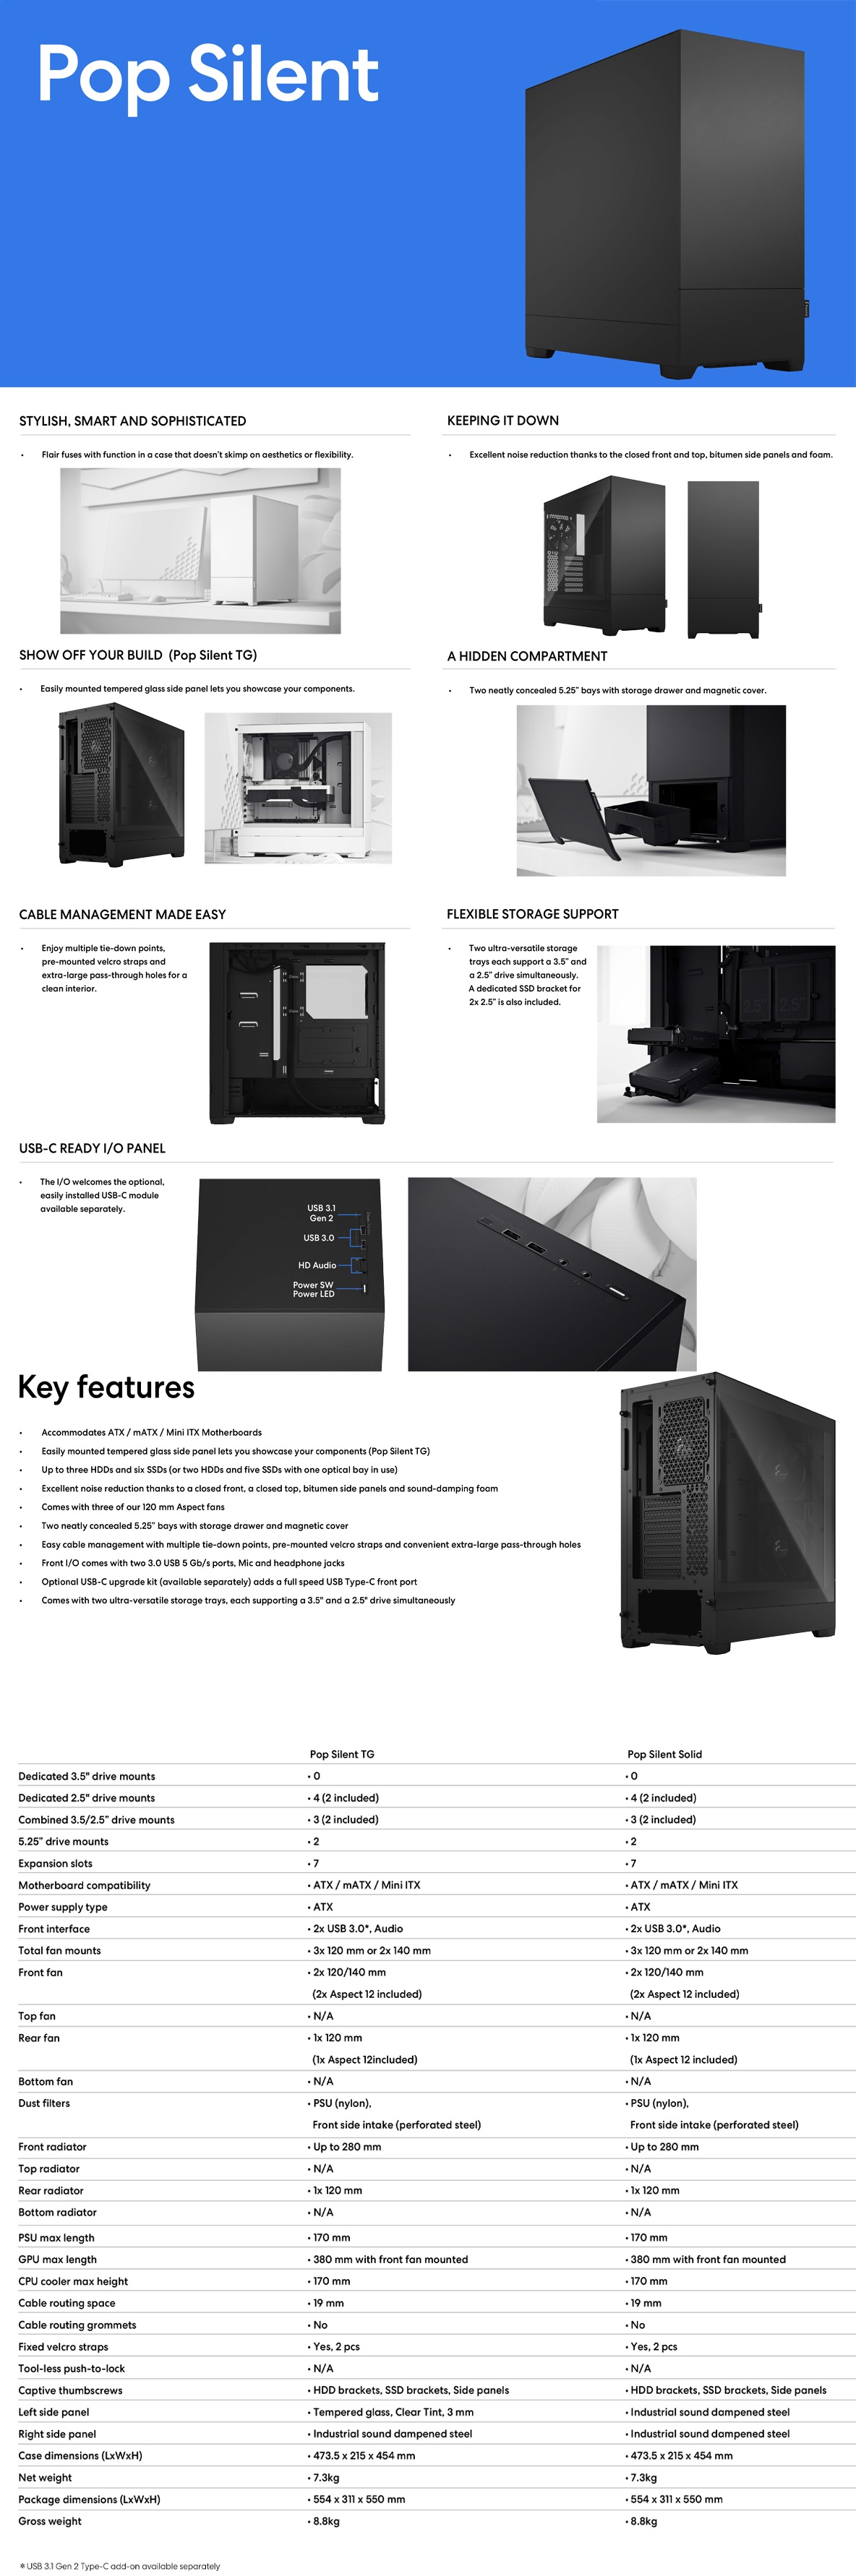 A large marketing image providing additional information about the product Fractal Design Pop Silent Mid Tower Case - Black - Additional alt info not provided